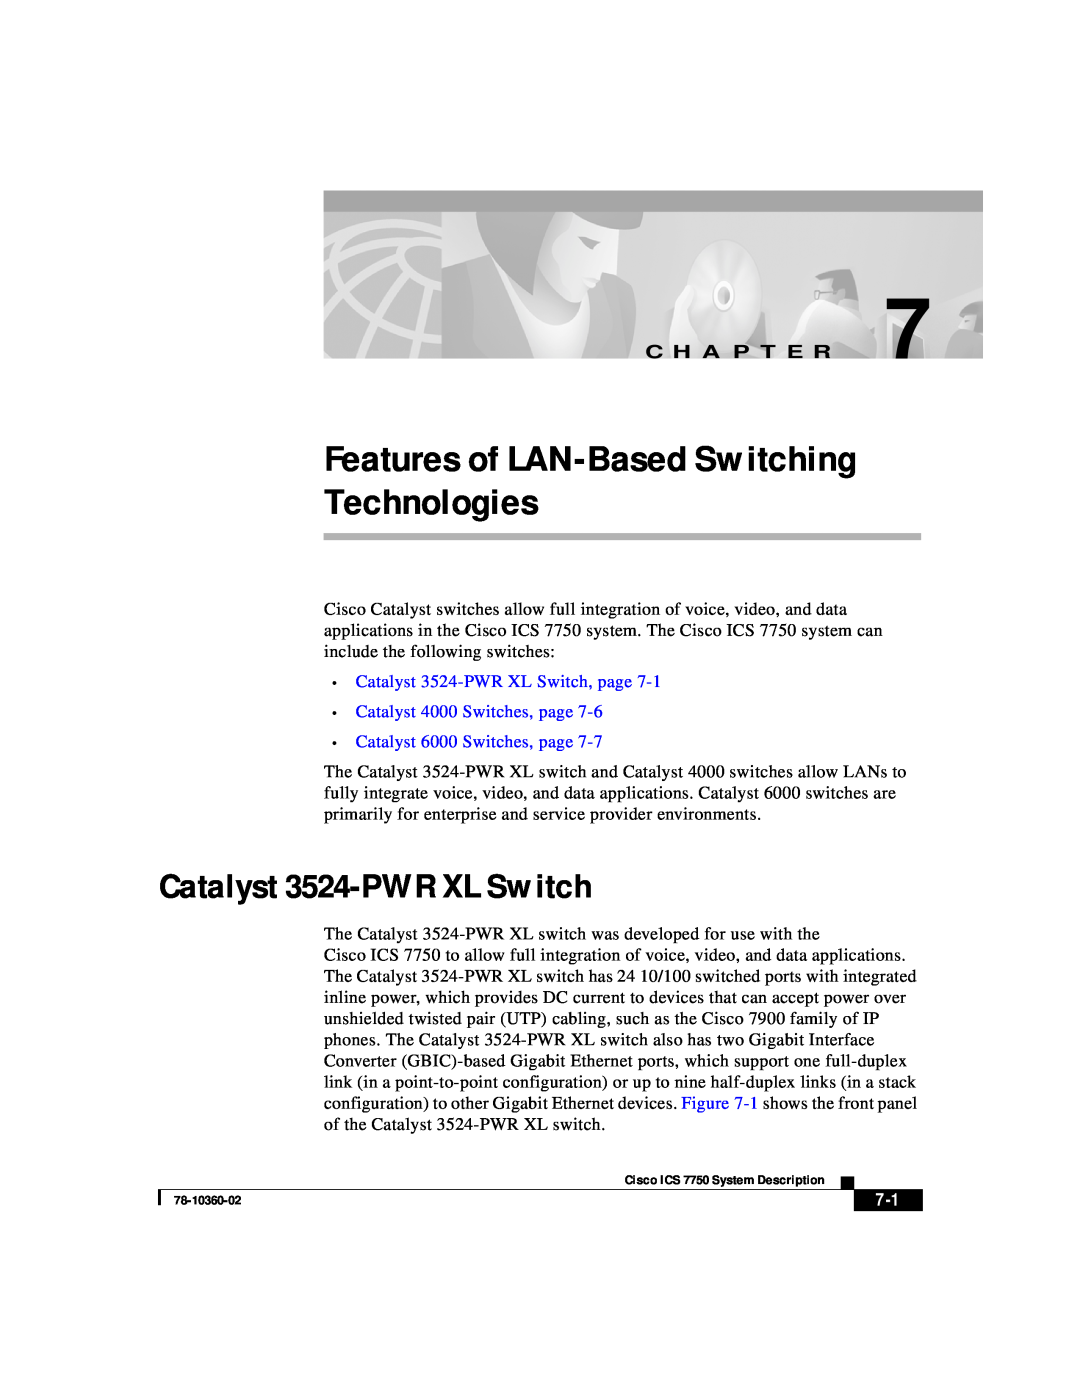 Cisco Systems ICS-7750 manual Features of LAN-Based Switching Technologies, Catalyst 3524-PWR XL Switch, C H A P T E R 